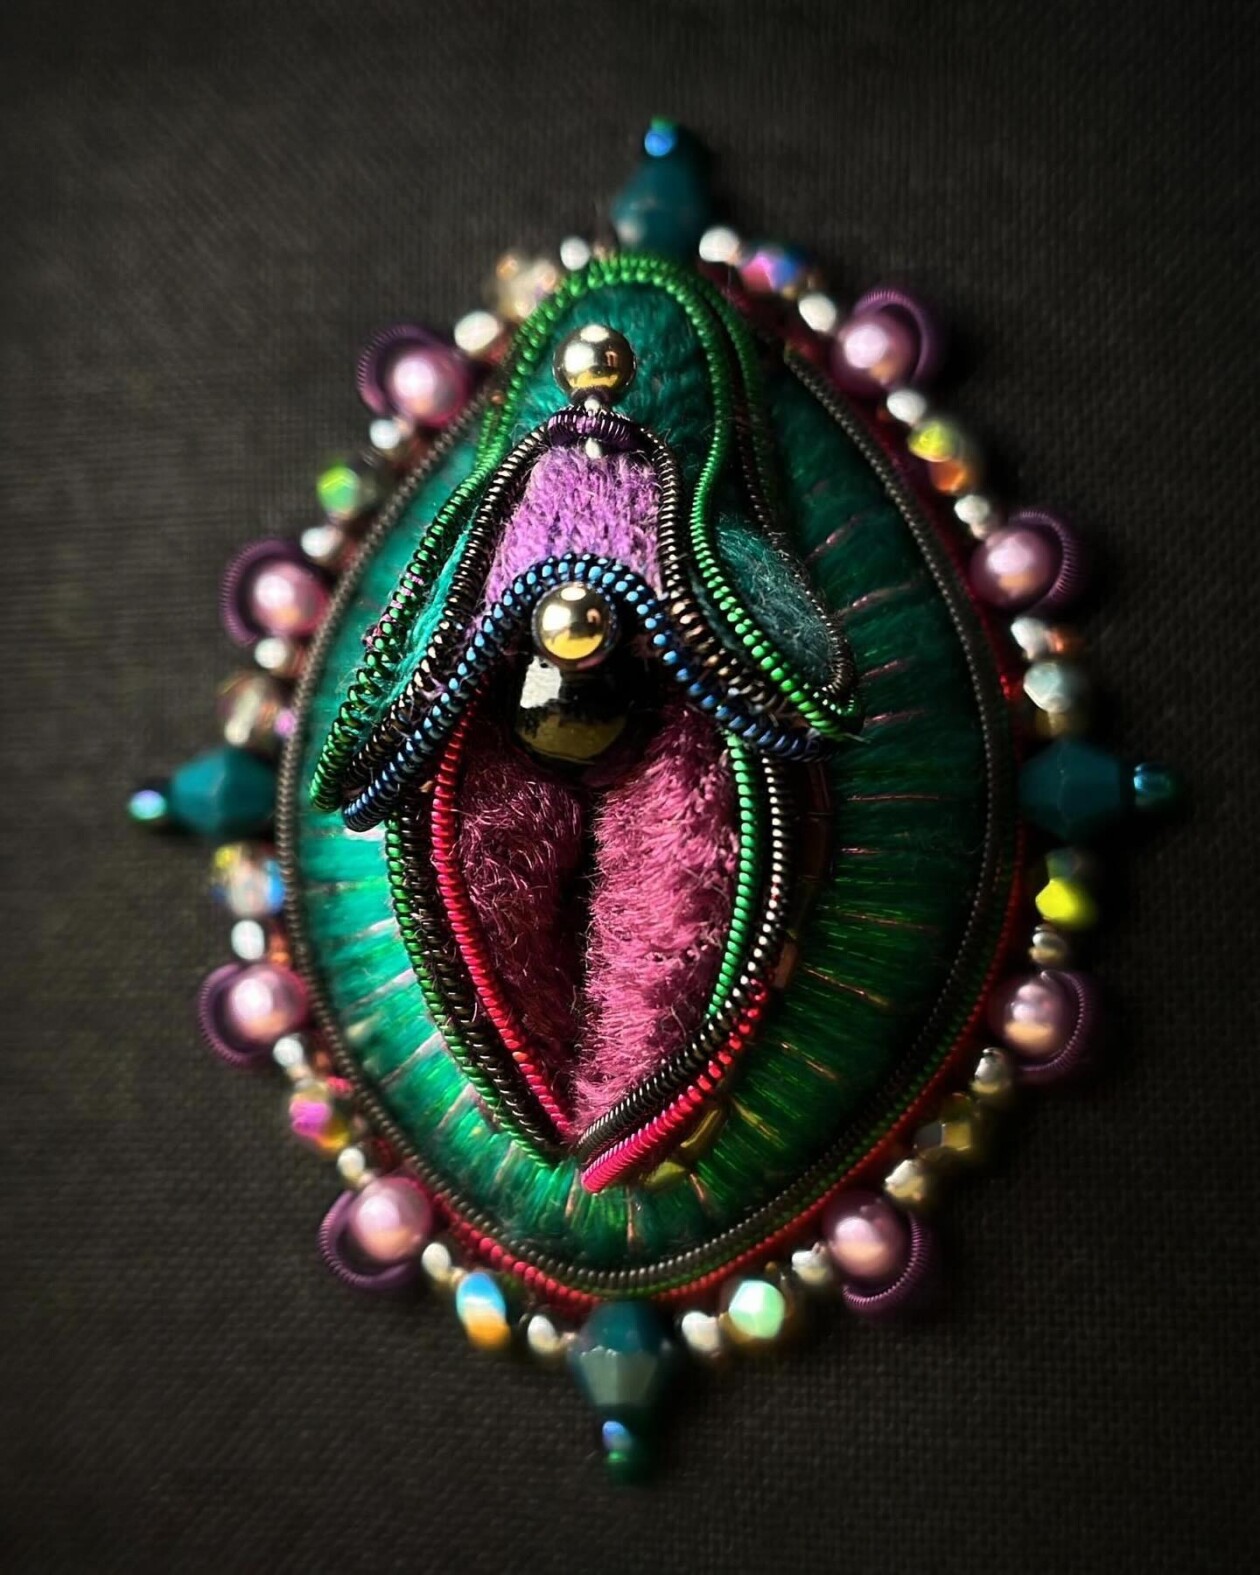 The Exquisite Embroidery And Bead Sculptures Of Studio Over And Out (7)